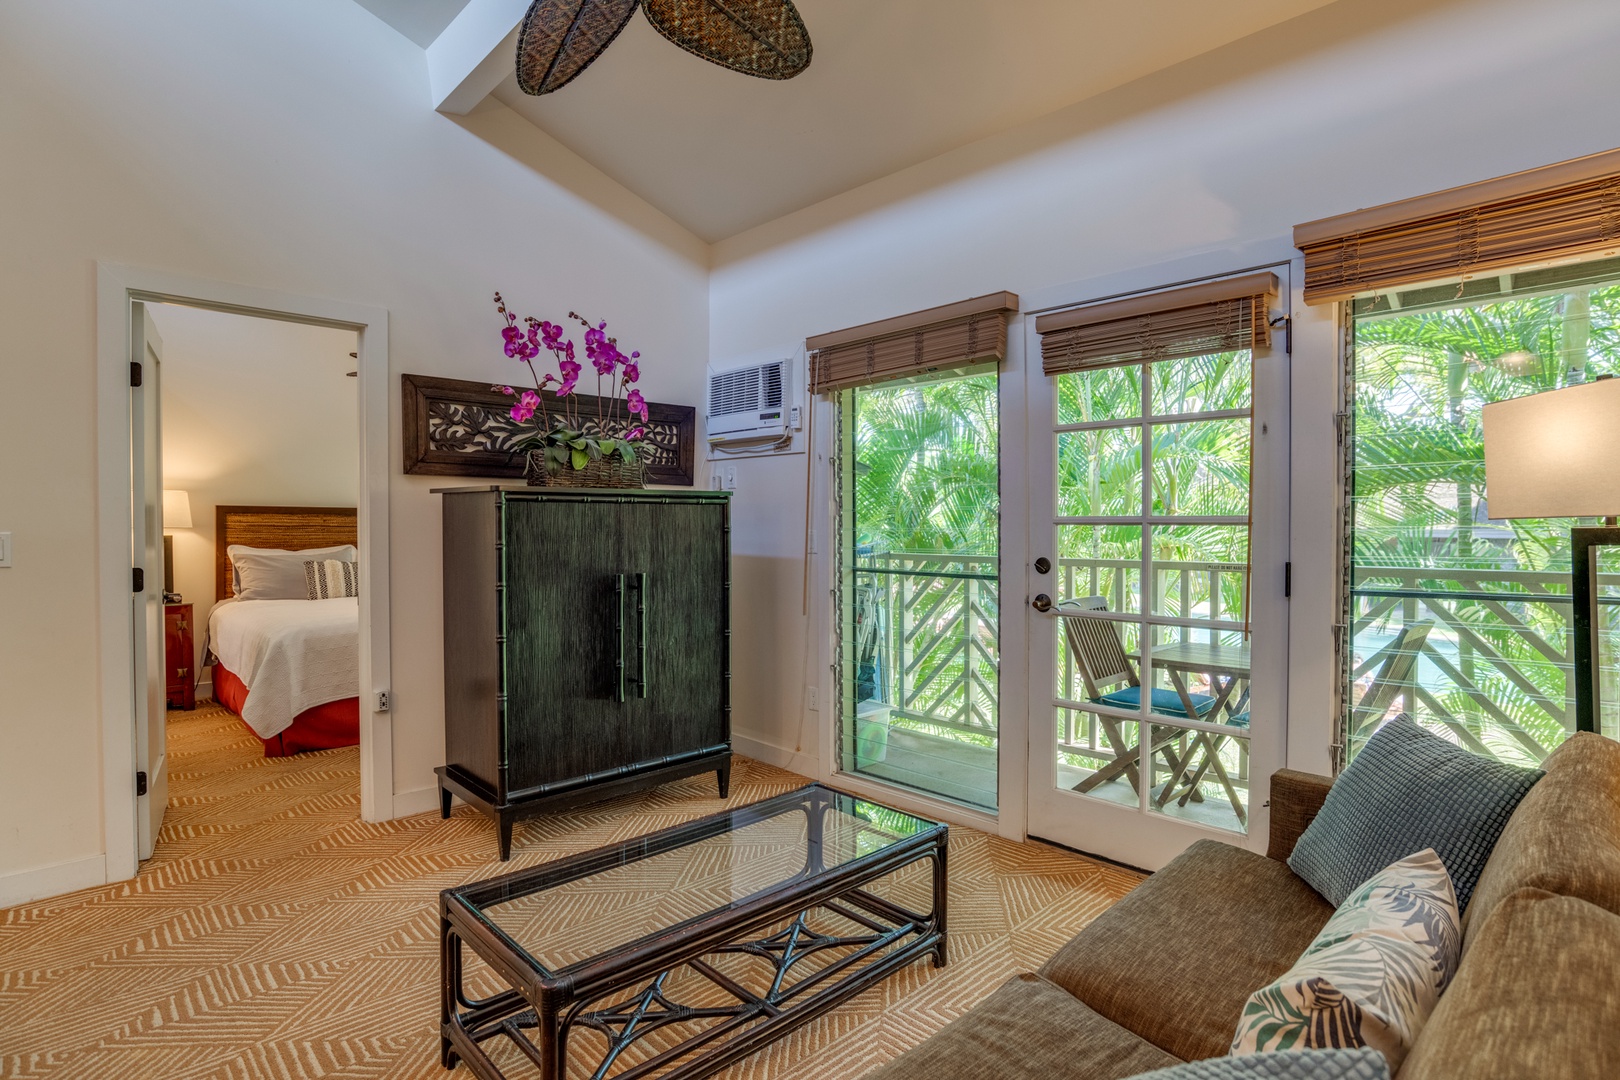 Lahaina Vacation Rentals, Aina Nalu D-207 - Welcome to paradise! This two-bedroom, two-bath condo is ideally situated on the top floor of Aina Nalu, a centrally-located boutique property in downtown Lahaina